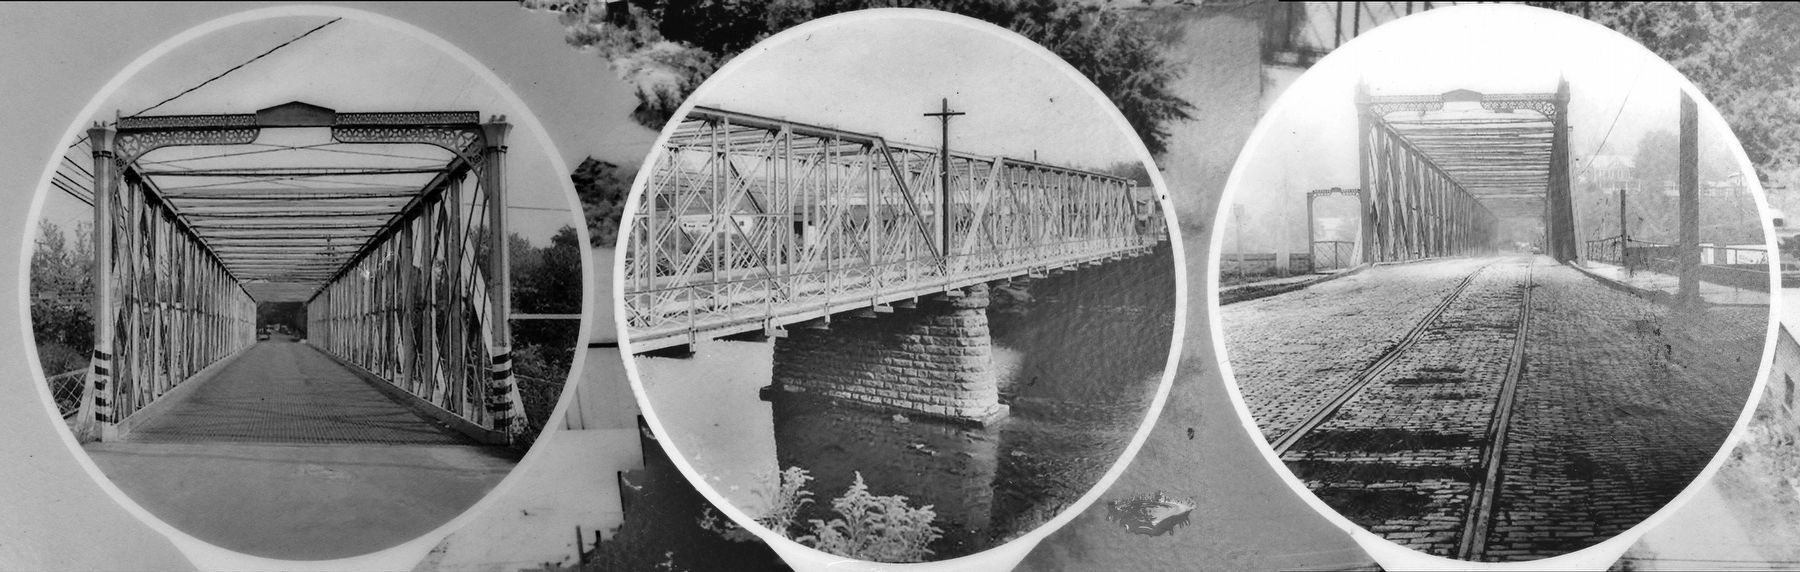 Marker detail: Old Mead Avenue Bridge Photos image. Click for full size.